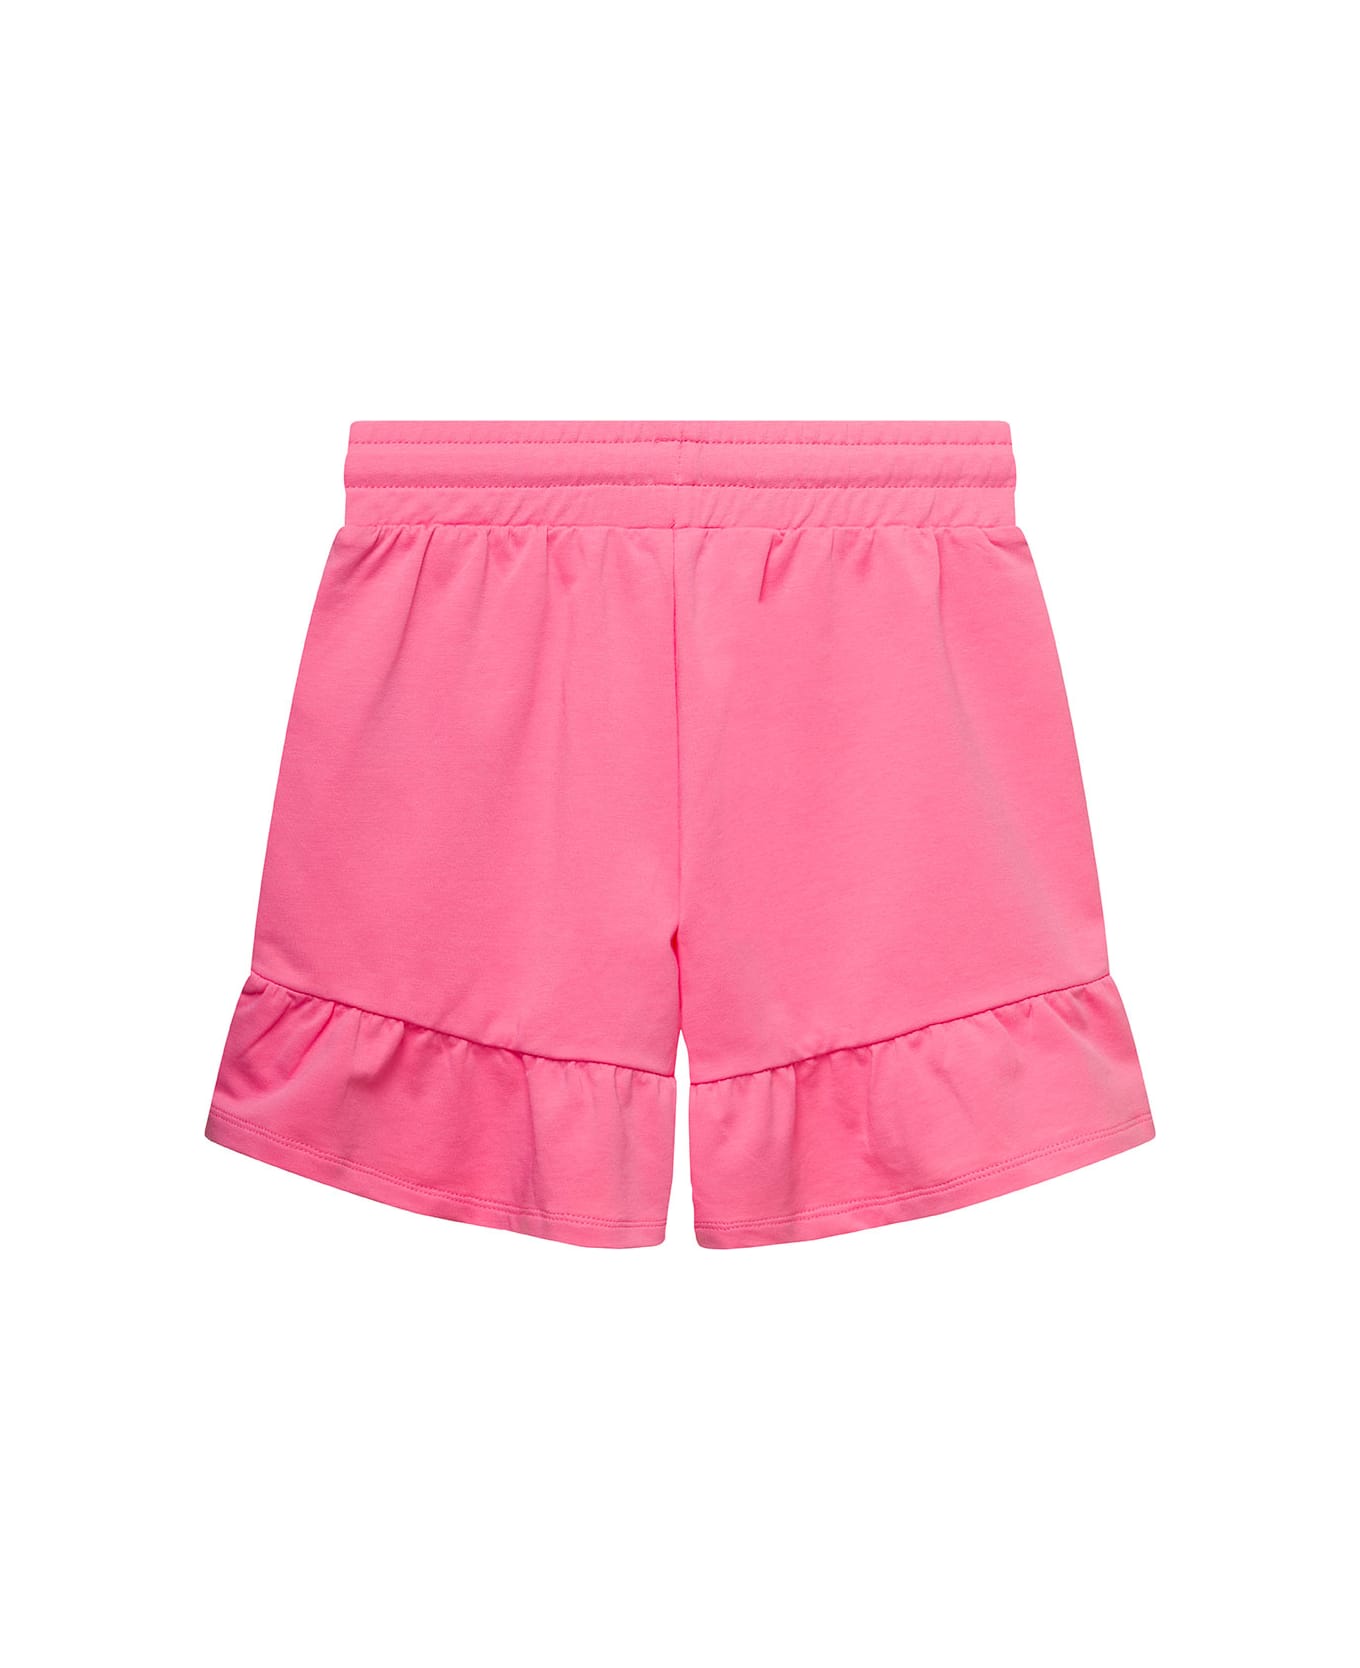 Moschino Pink Shorts With Teddy Bear Print And Frill Trim In Stretch Cotton Girl - Pink ボトムス